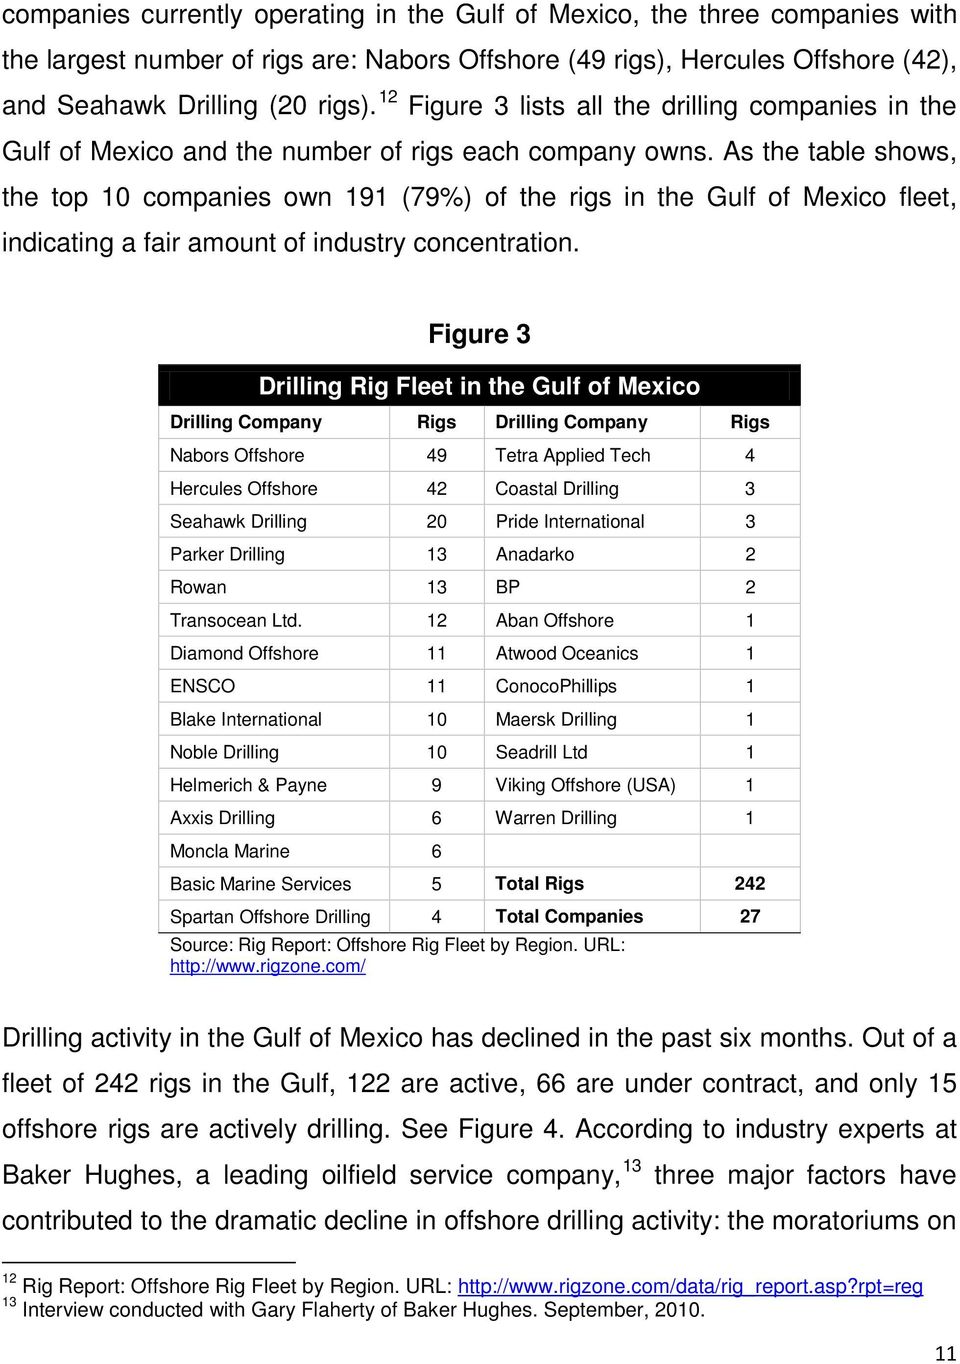 As the table shows, the top 10 companies own 191 (79%) of the rigs in the Gulf of Mexico fleet, indicating a fair amount of industry concentration.